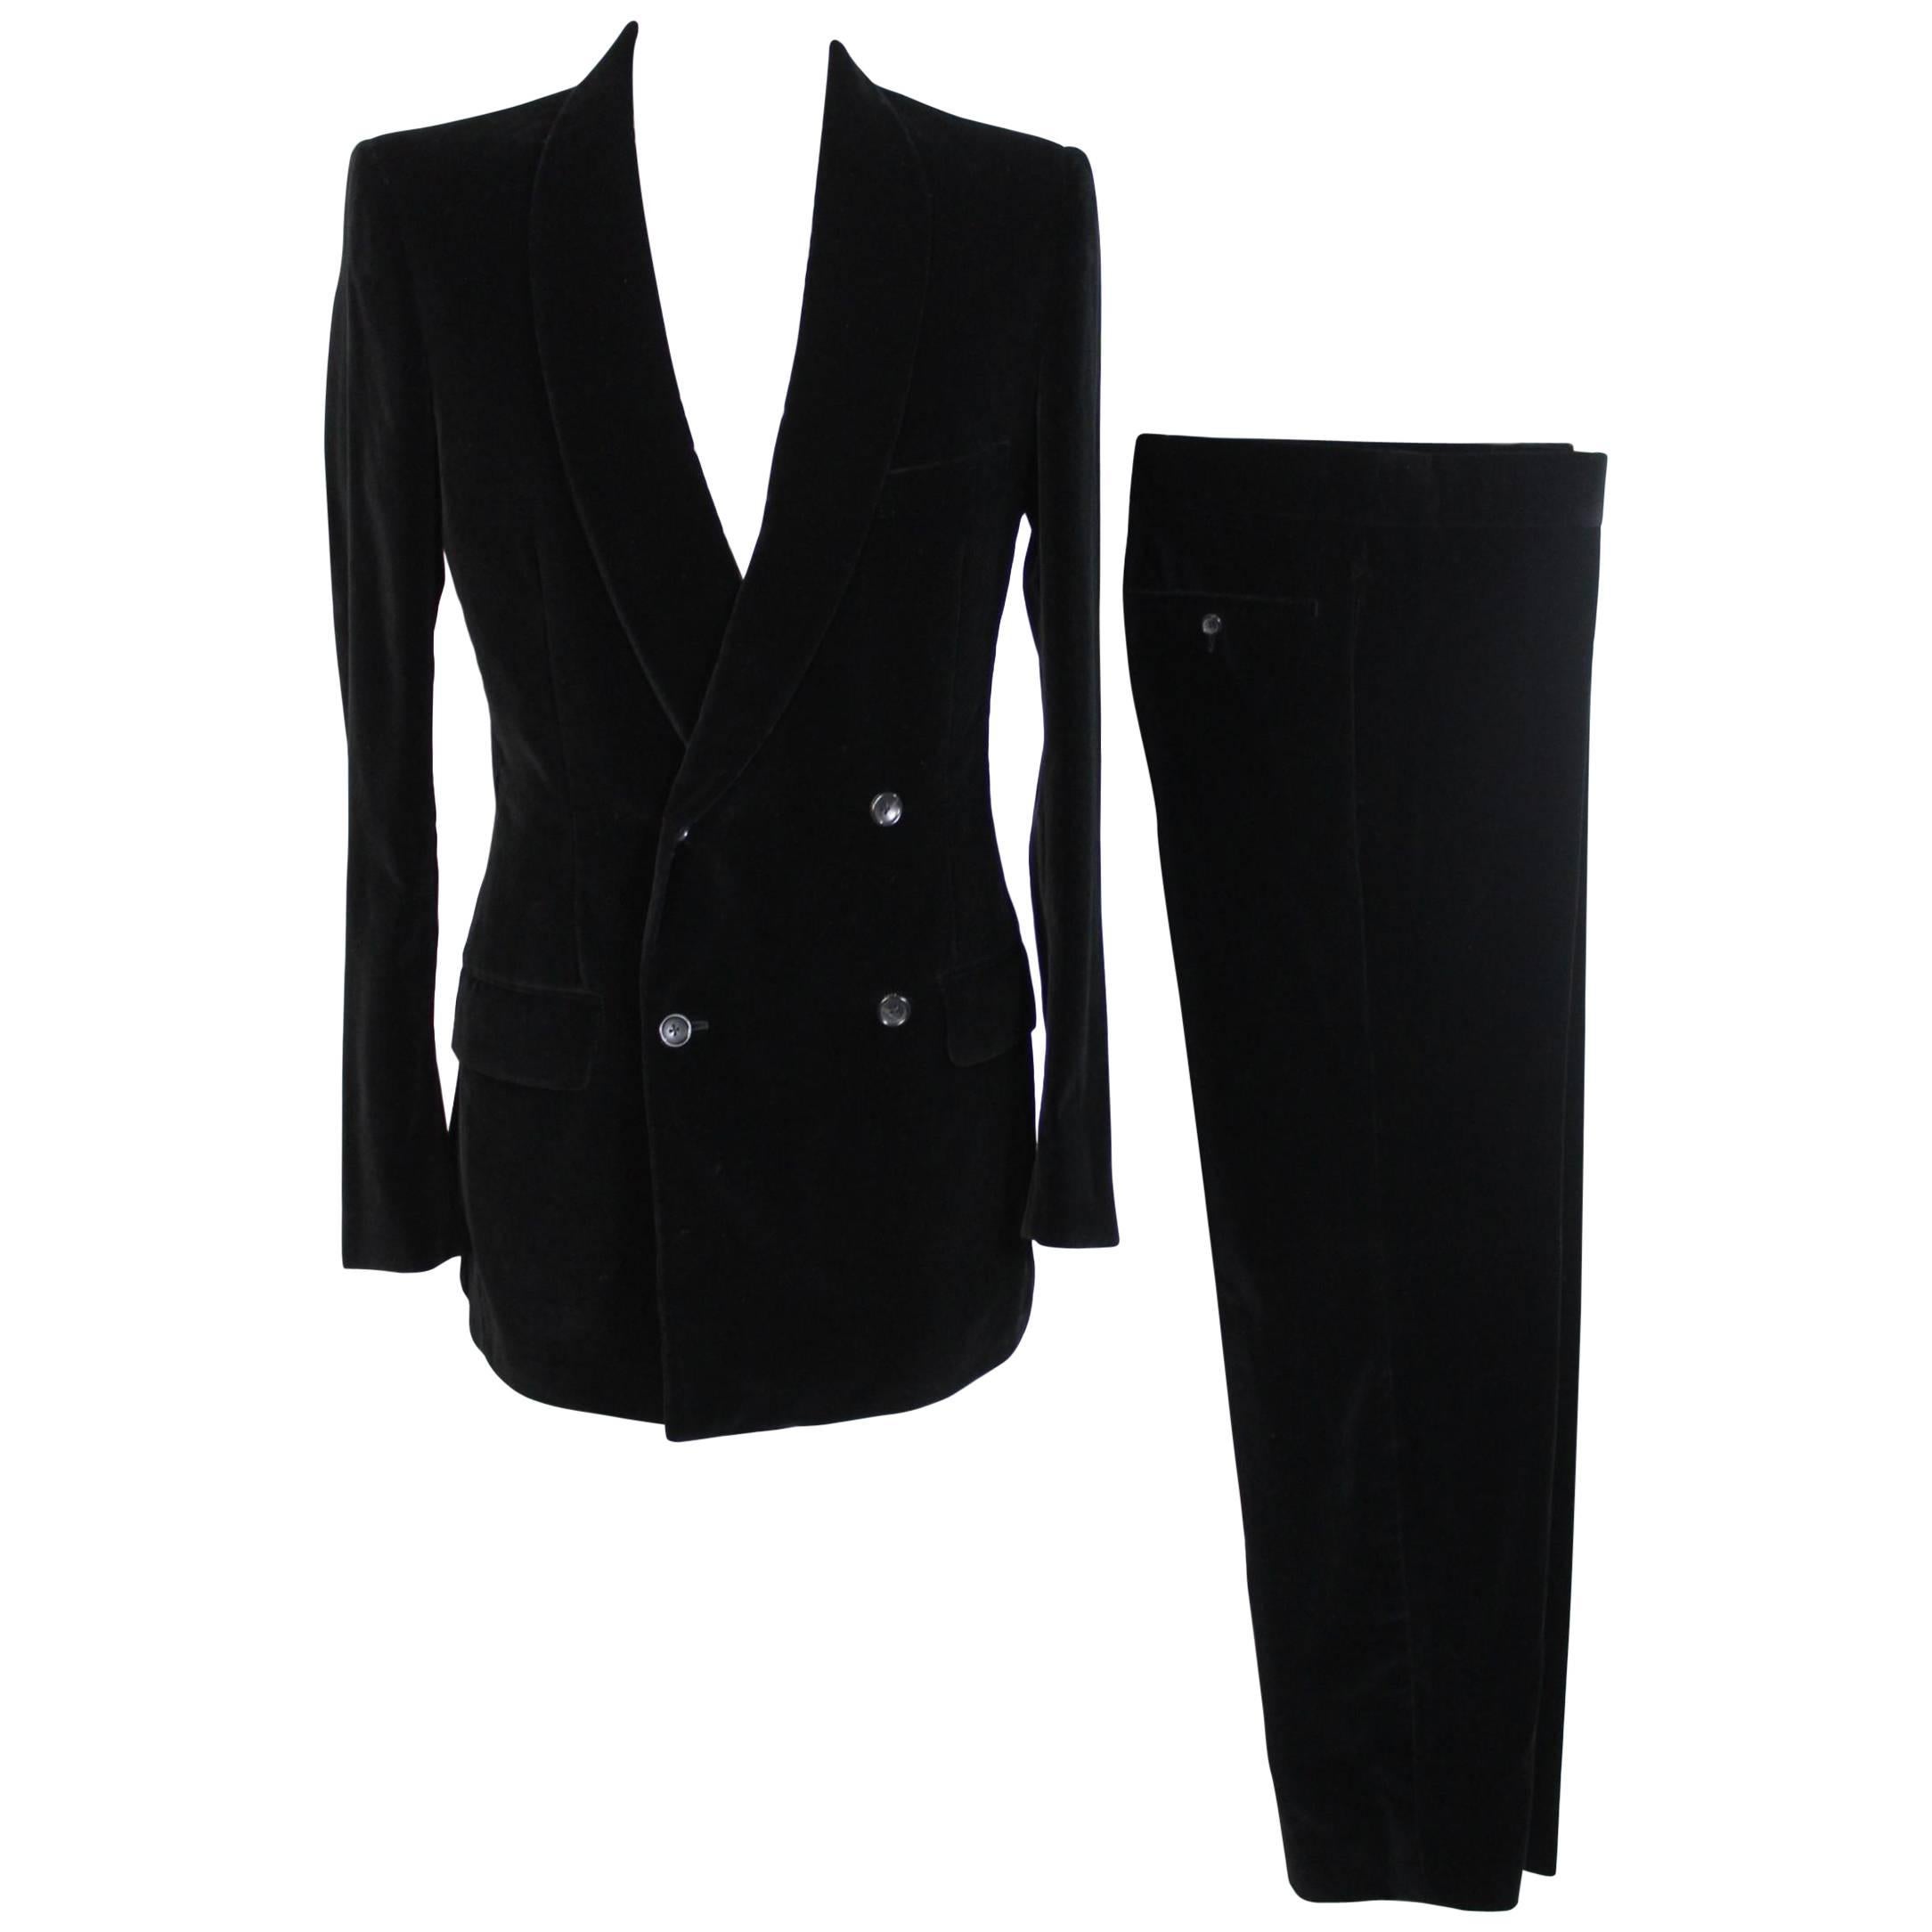 Tom Ford For Gucci Double Breasted Black Cotton Italian Pant Suit, 1990s 